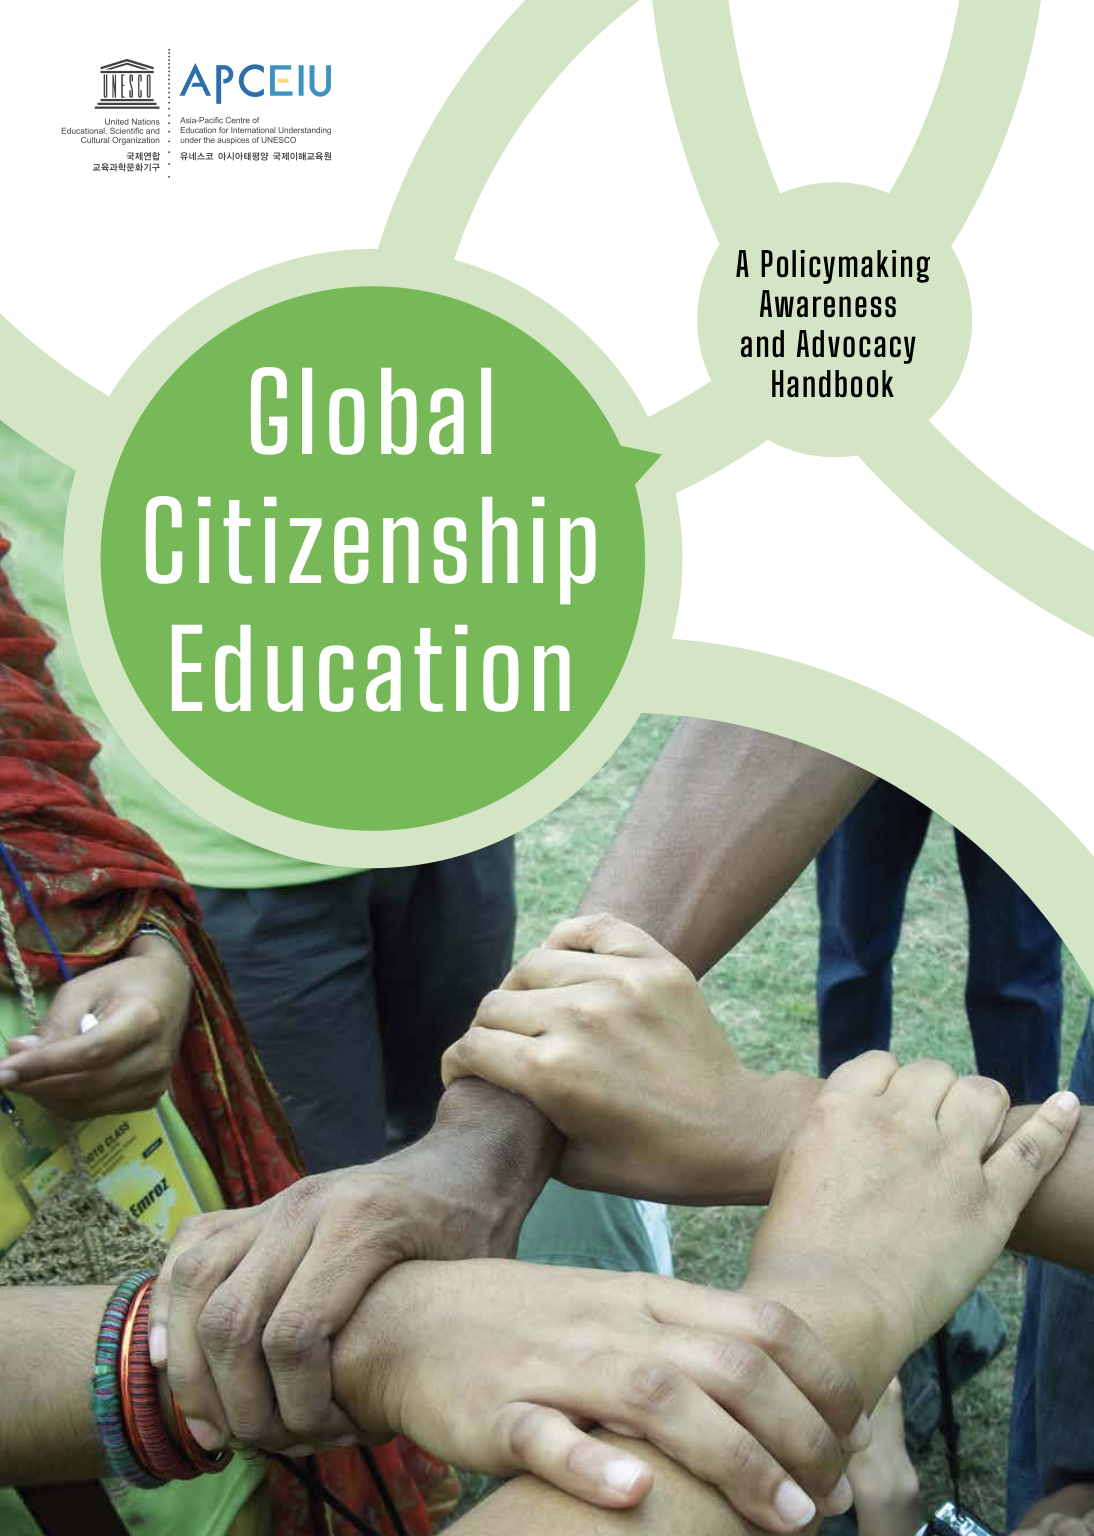 Global Citizenship Education: A Policymaking Awareness and Advocacy Handbook